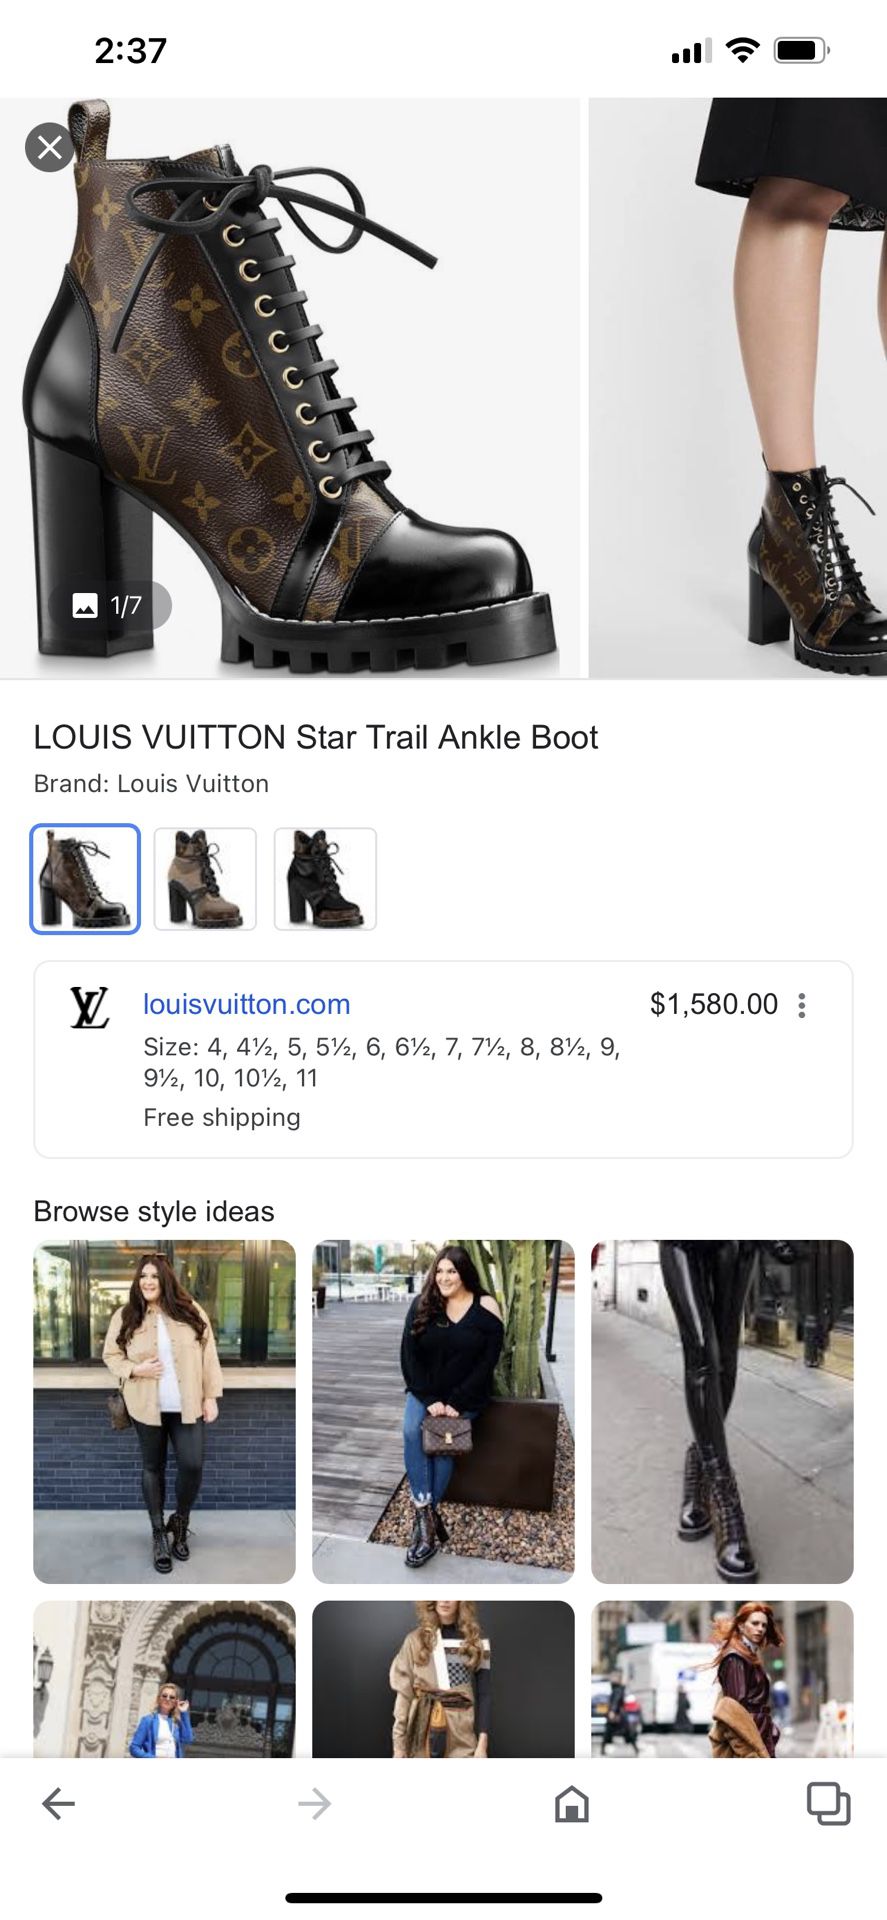 LOUIS VUITTON STAR TRAIL ANKLE BOOT for Sale in Hamilton, OH - OfferUp